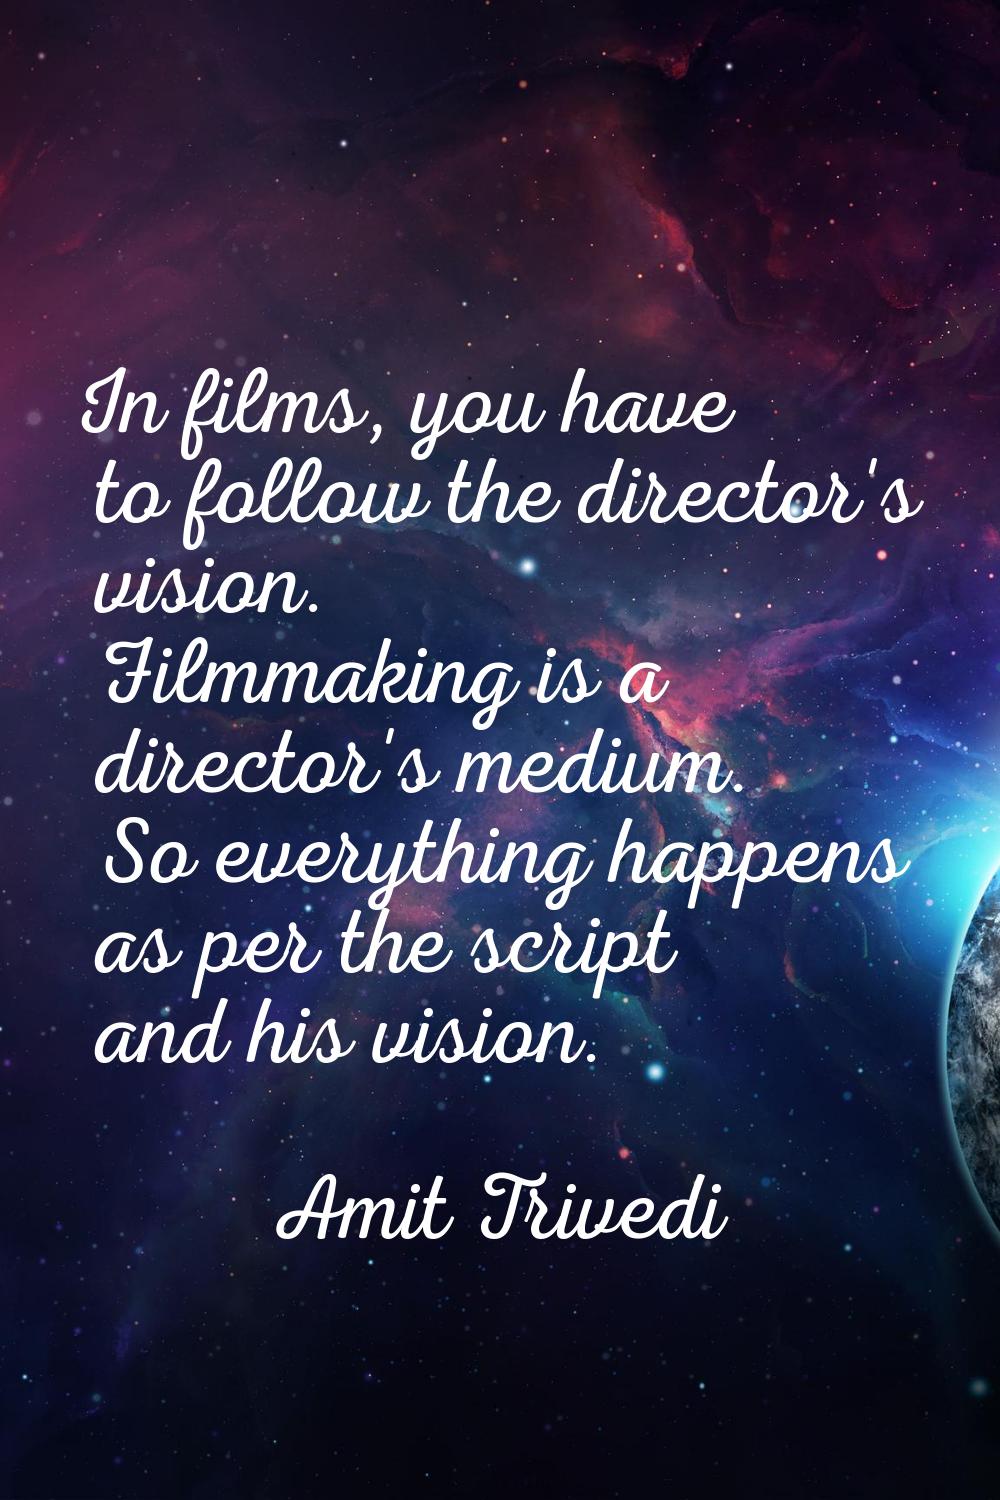 In films, you have to follow the director's vision. Filmmaking is a director's medium. So everythin